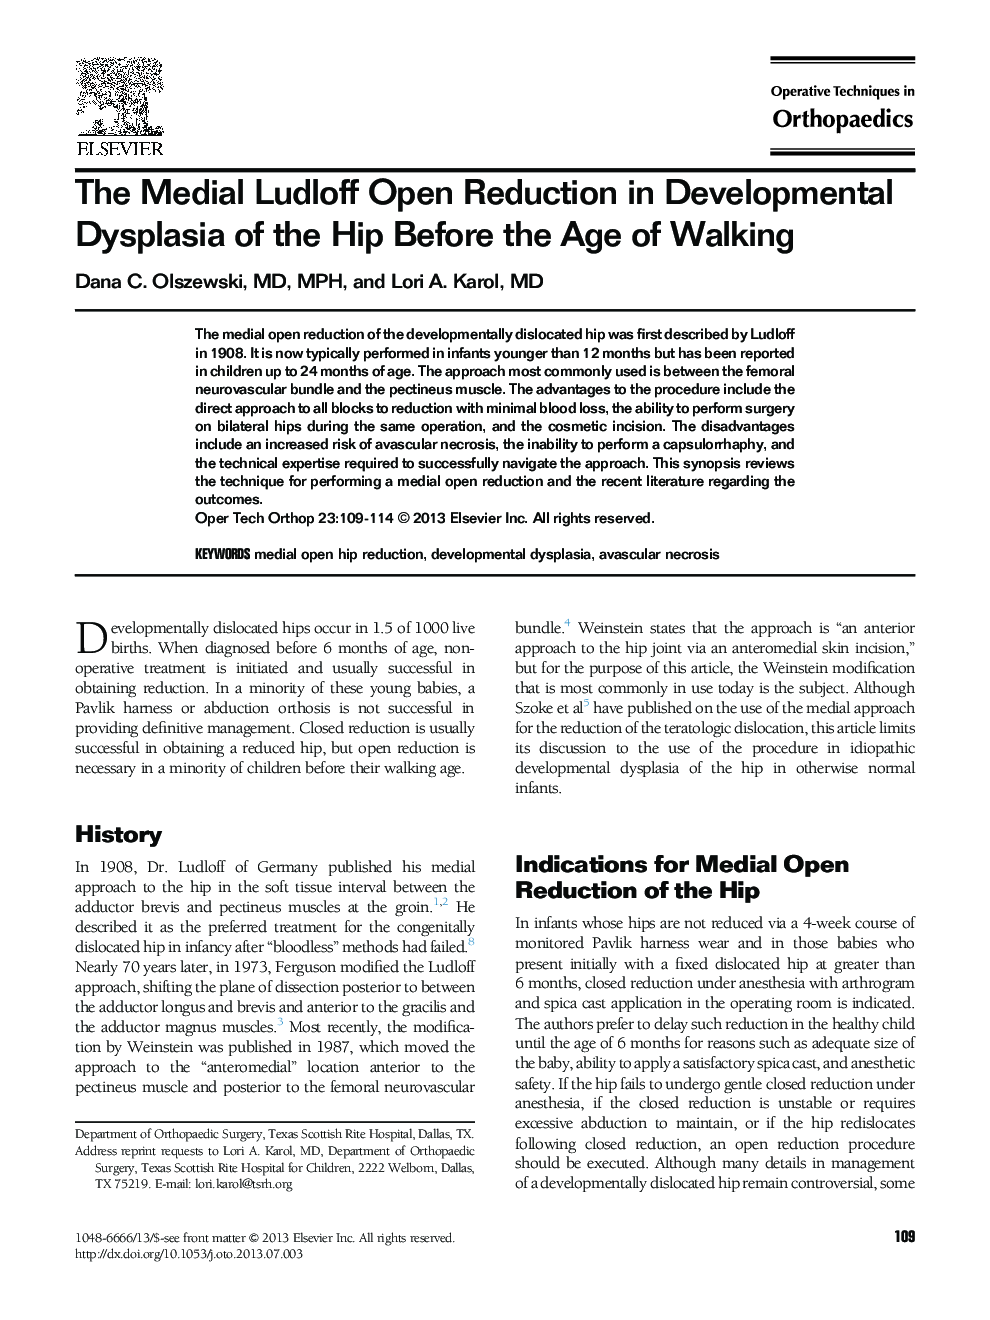 The Medial Ludloff Open Reduction in Developmental Dysplasia of the Hip Before the Age of Walking